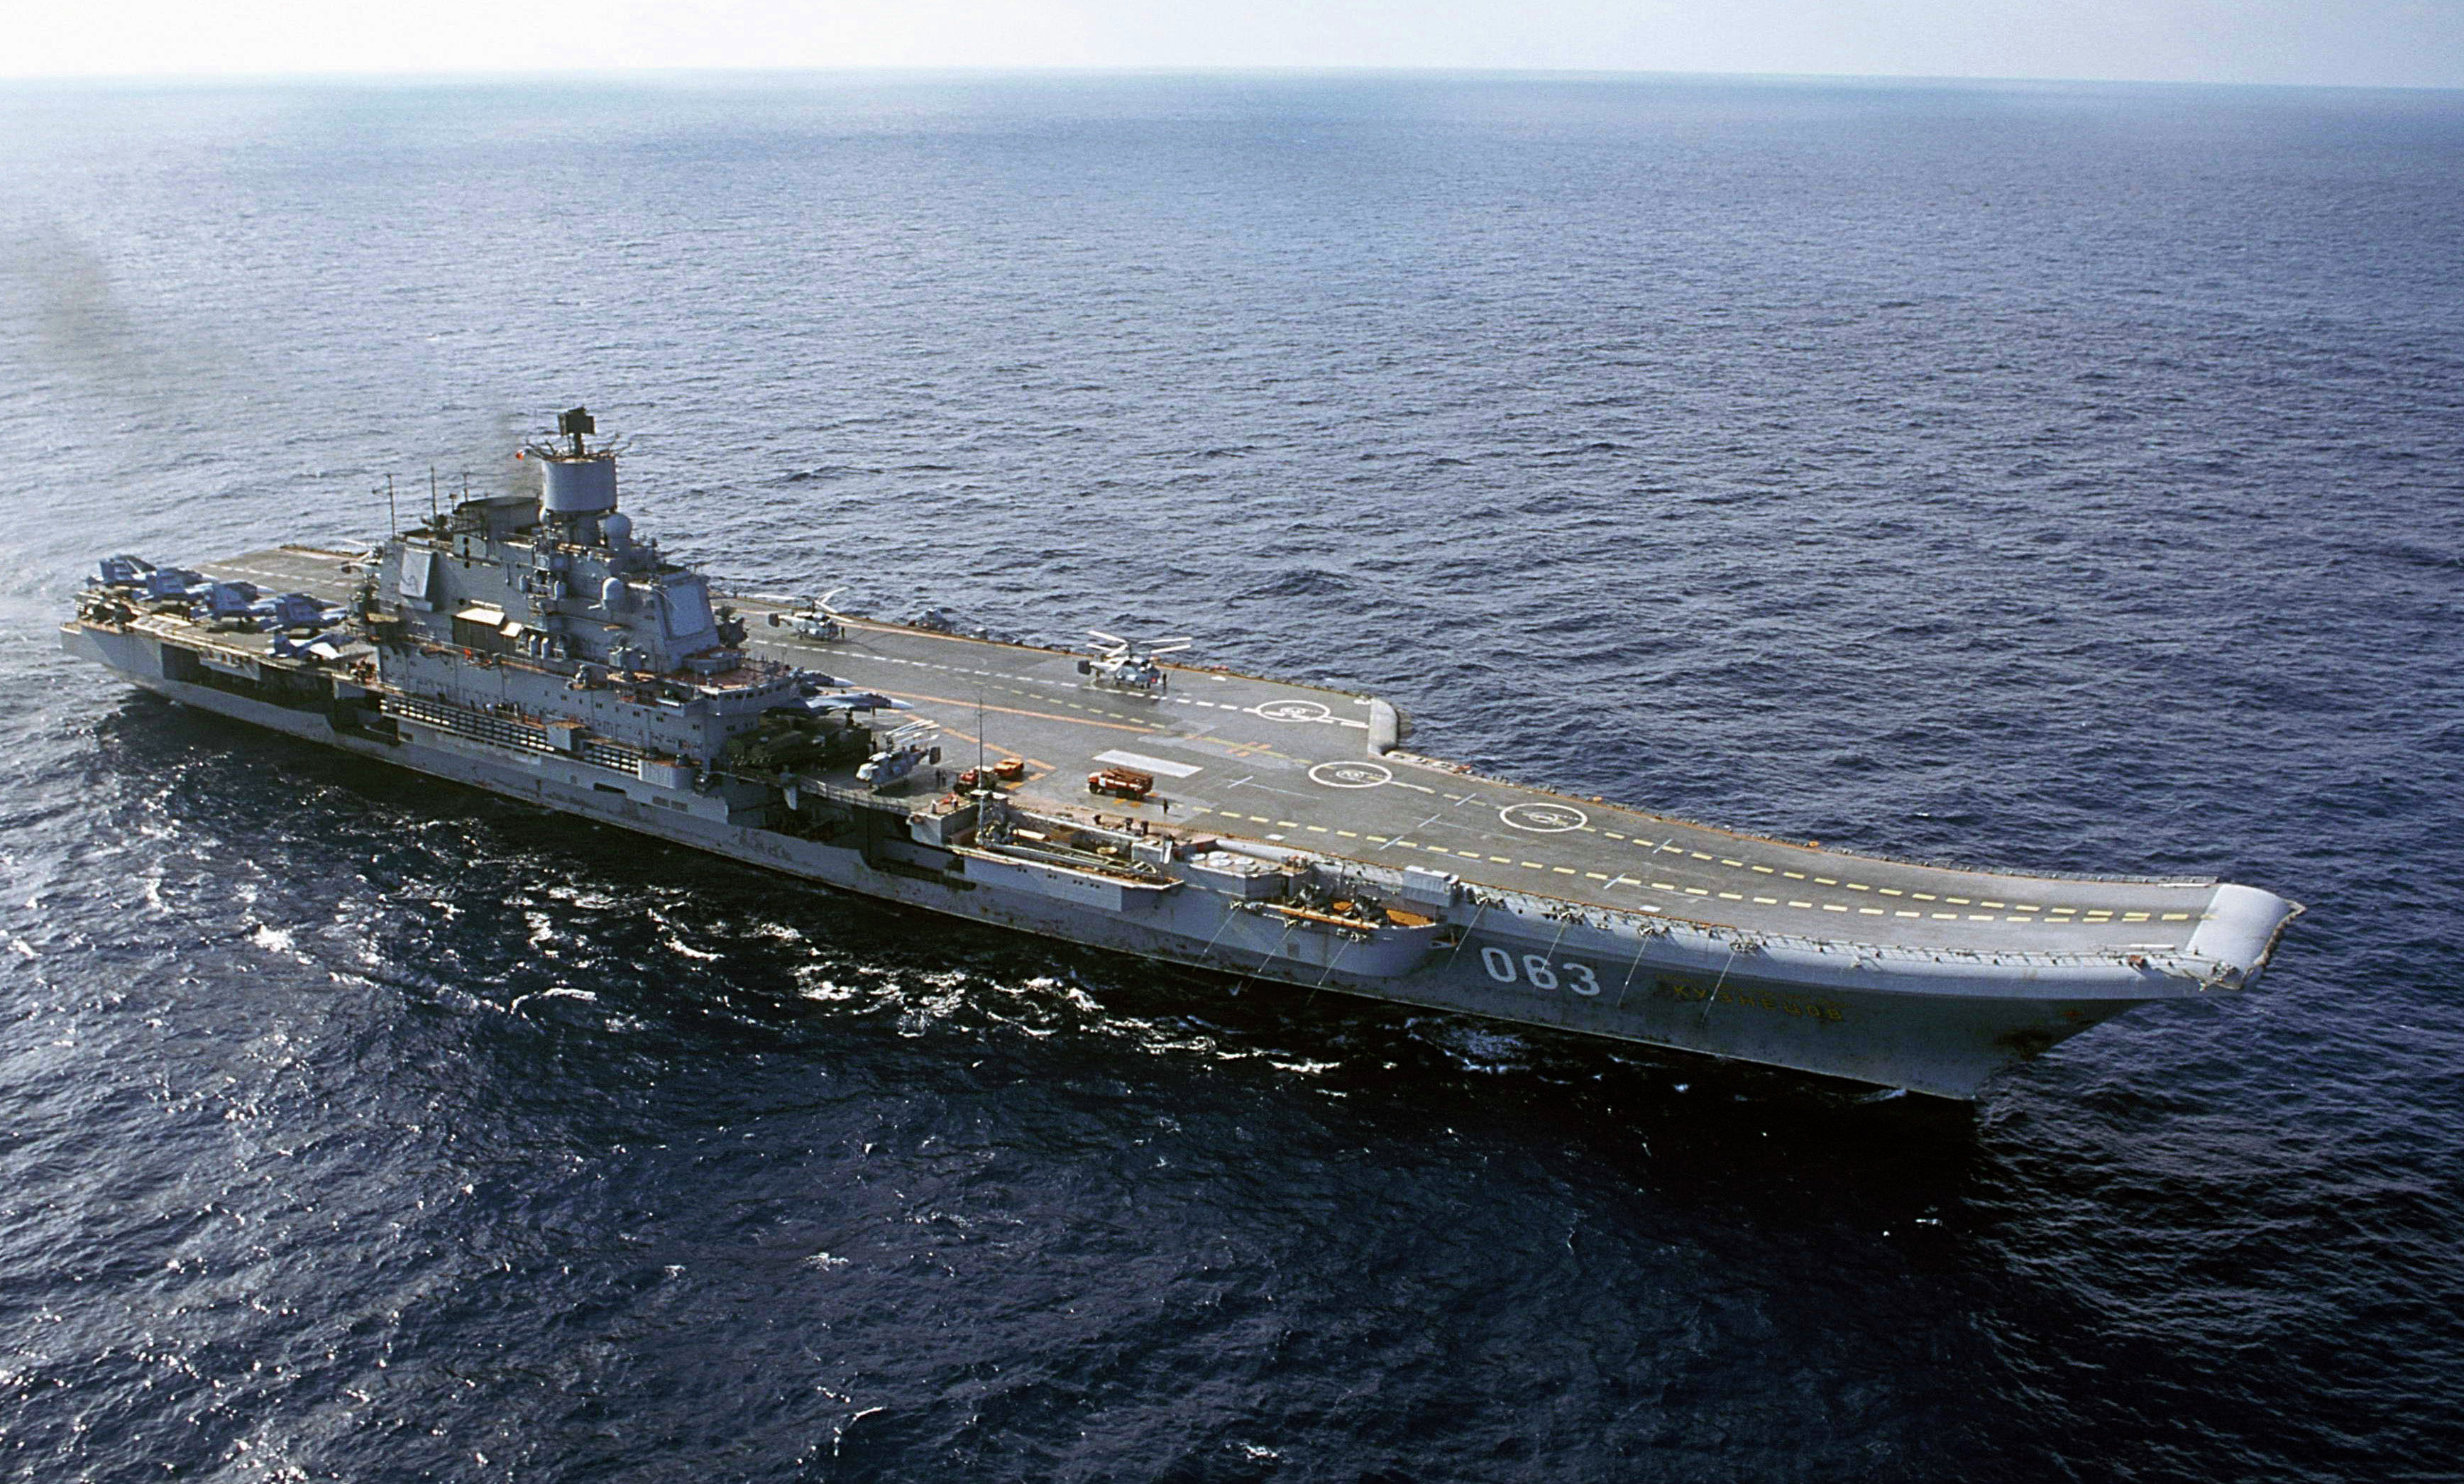 The aircraft carrier "Admiral Kuznetsov" in the sea